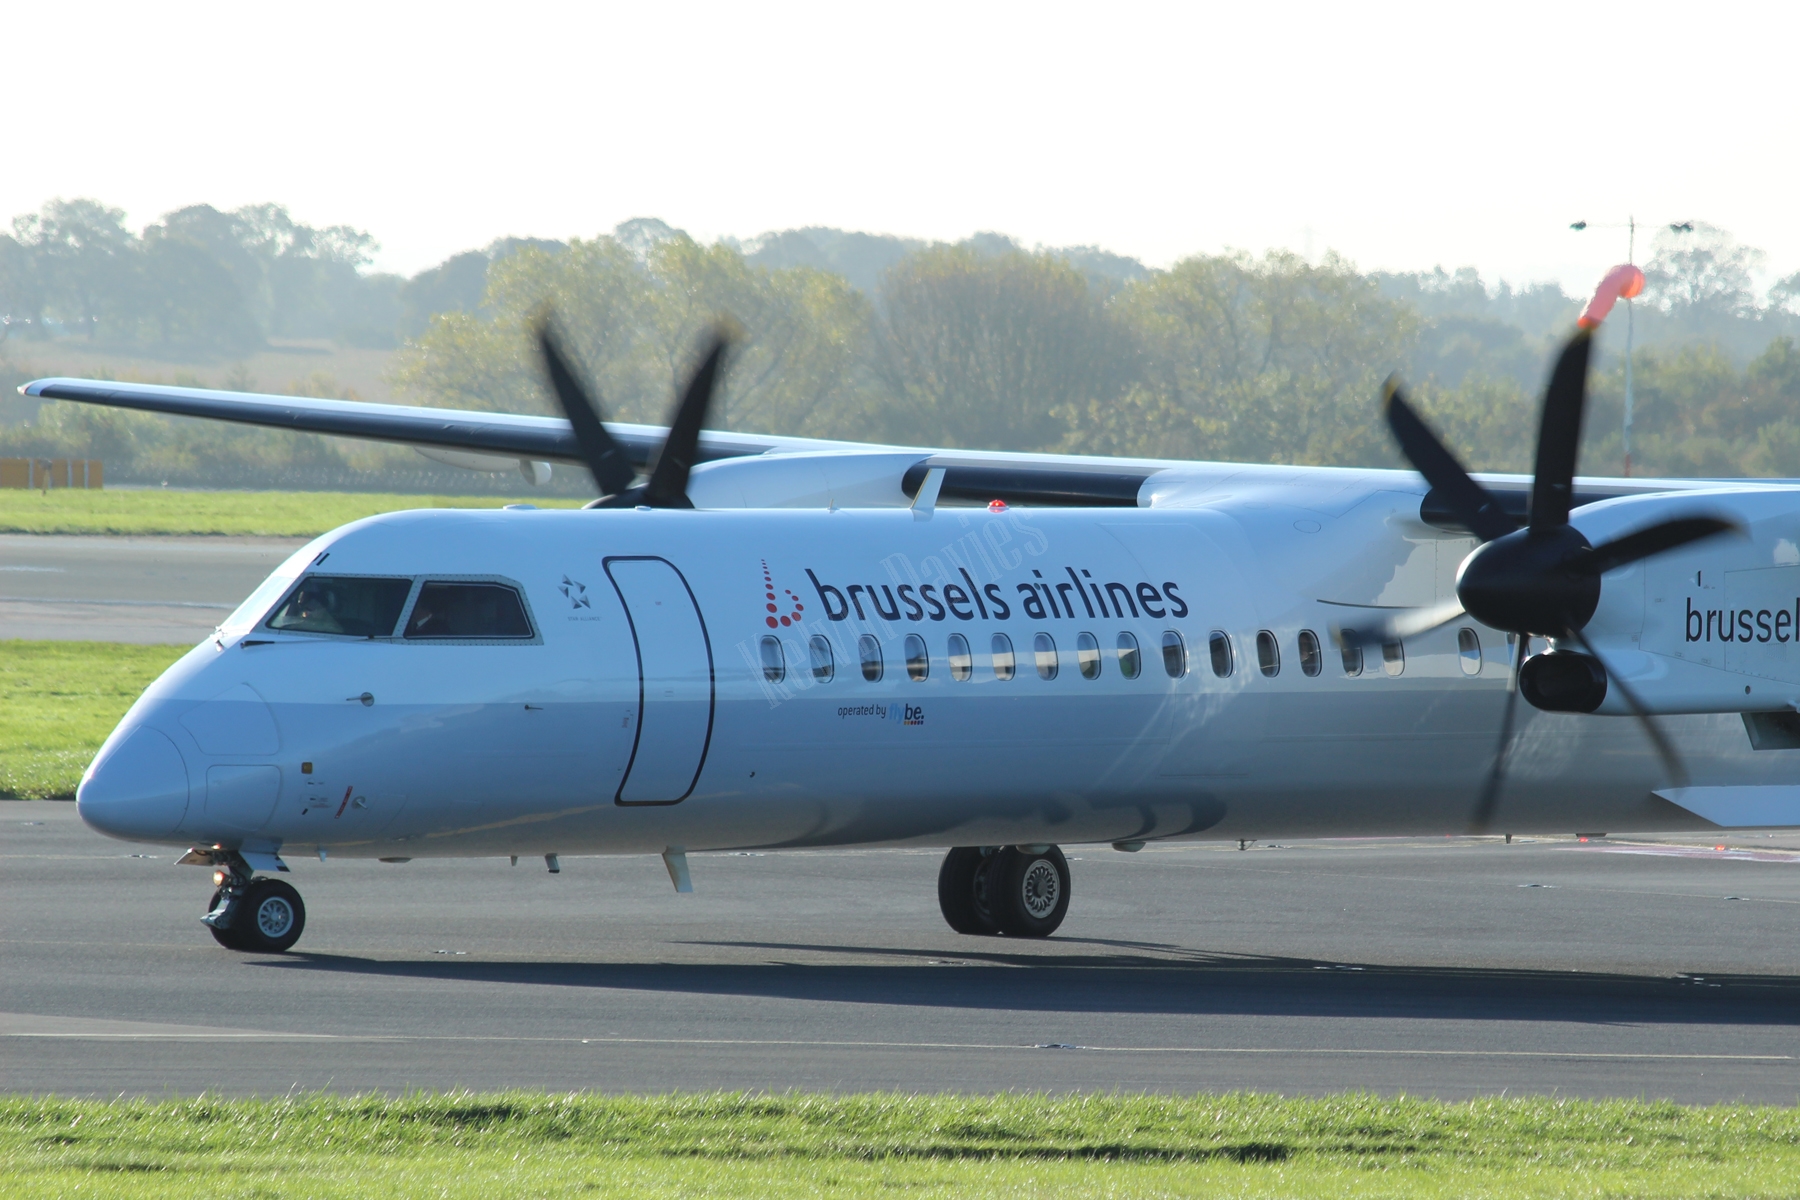 Brussels Airlines DH8 G-ECOI